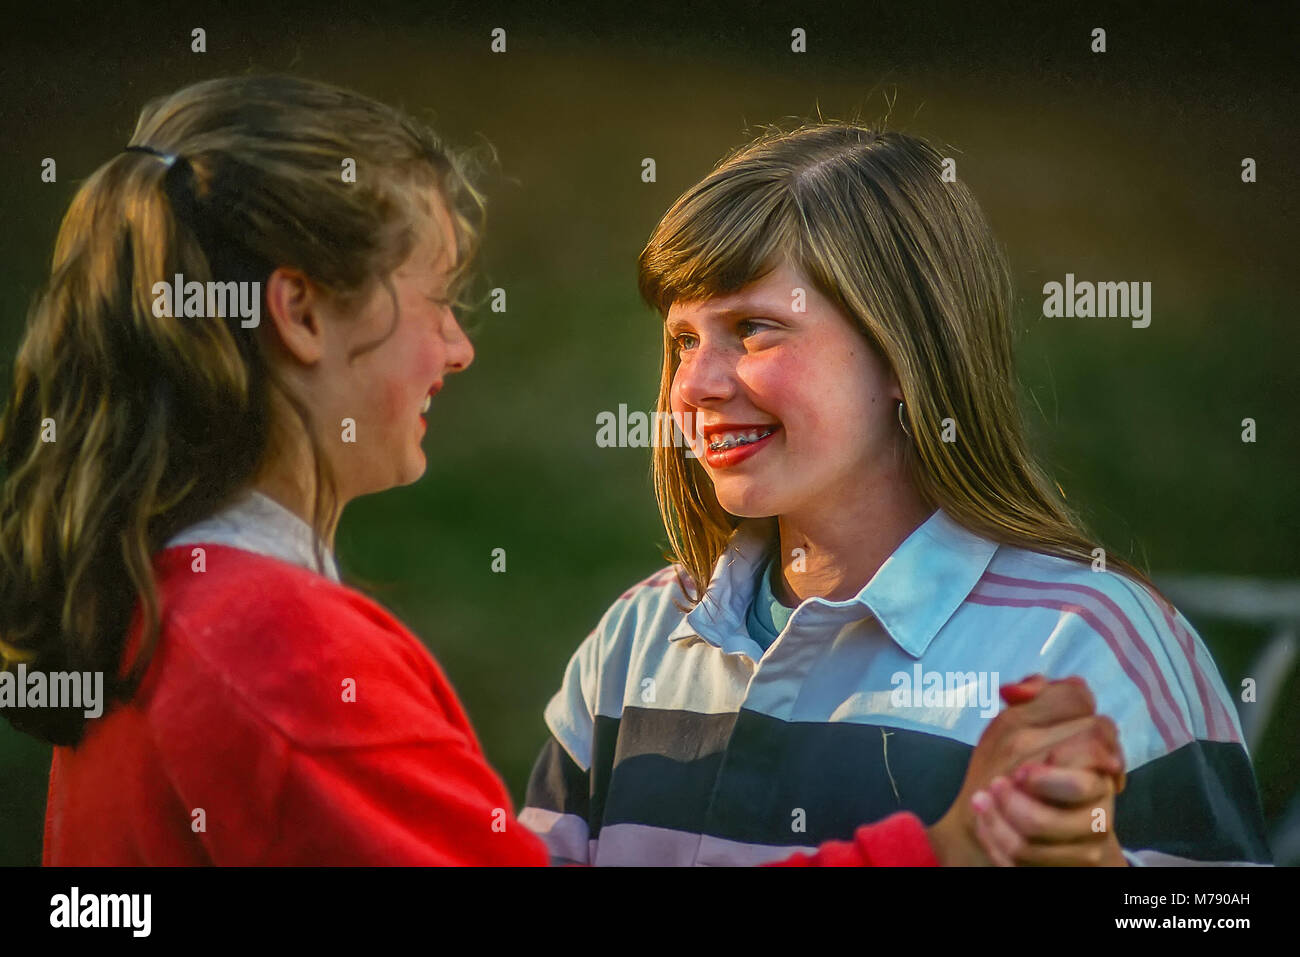 Two happy children at summer camp holding hands and smiling at each other. Stock Photo